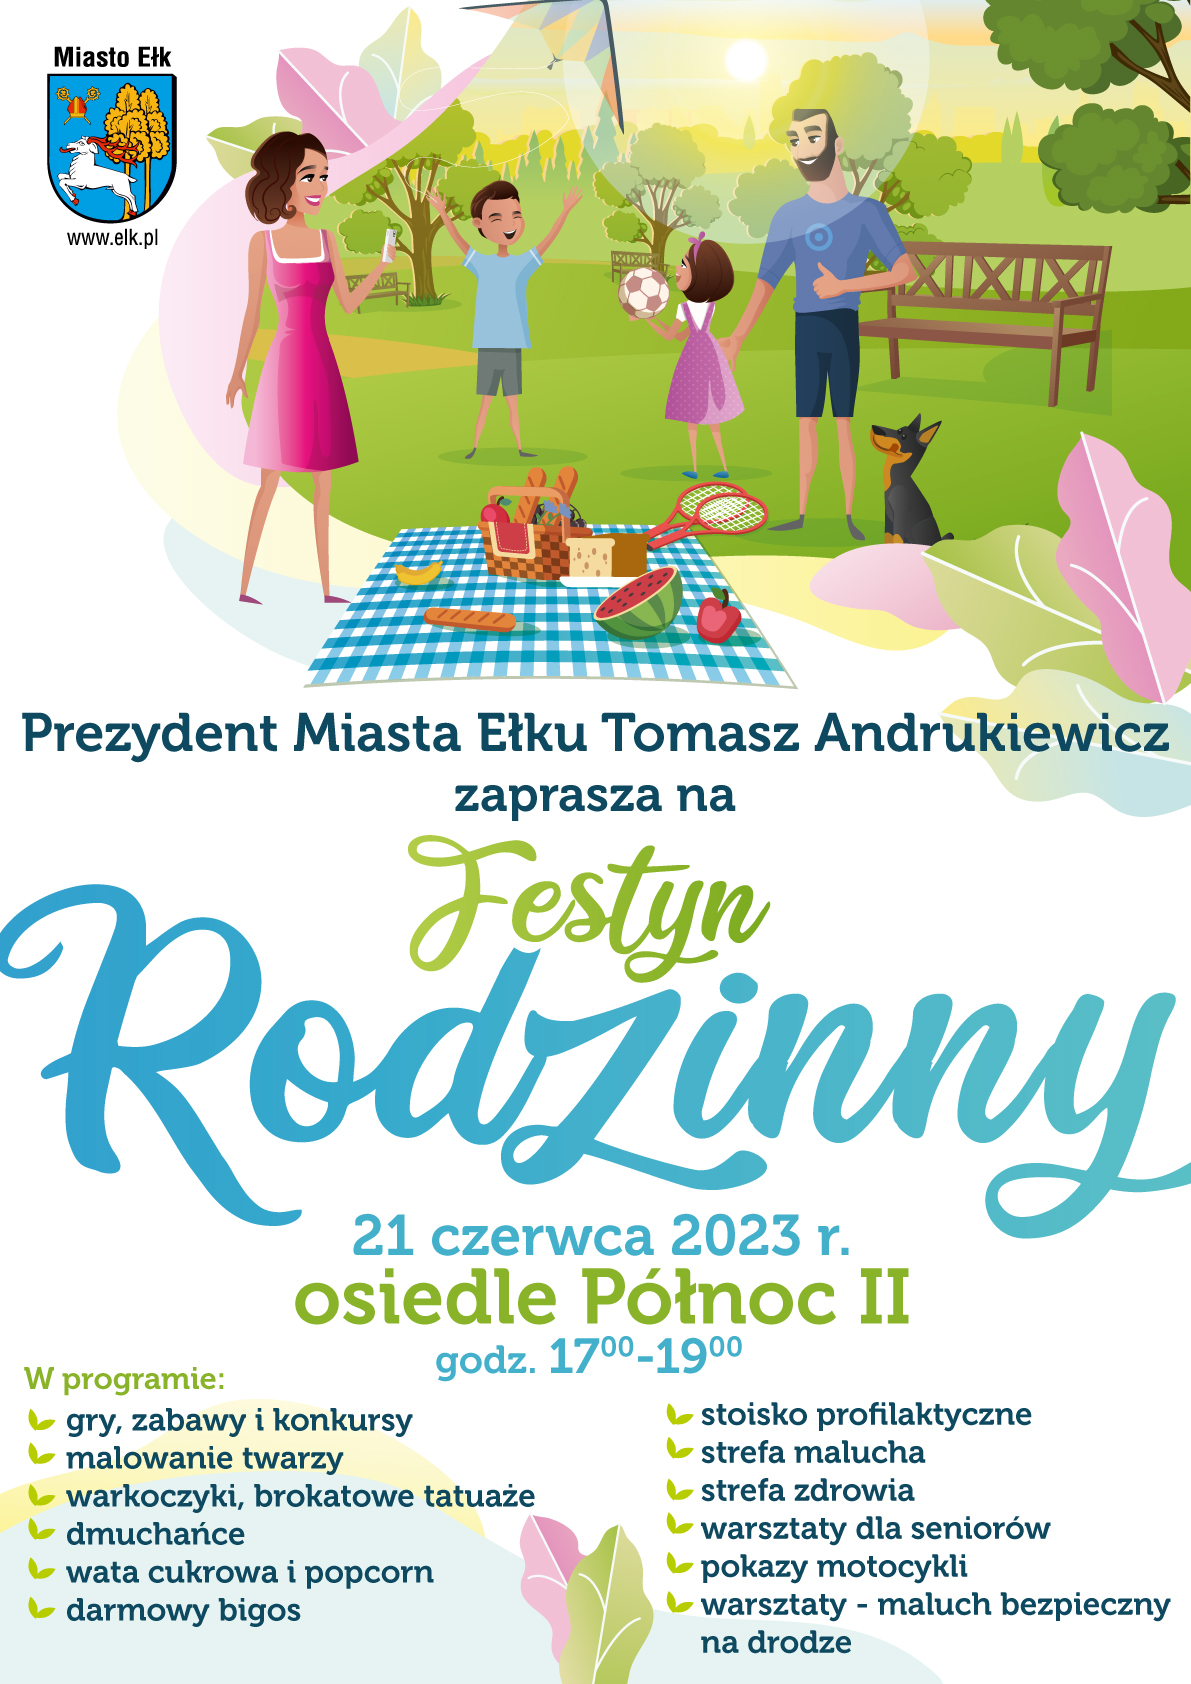 Family Festival at the Północ II housing estate